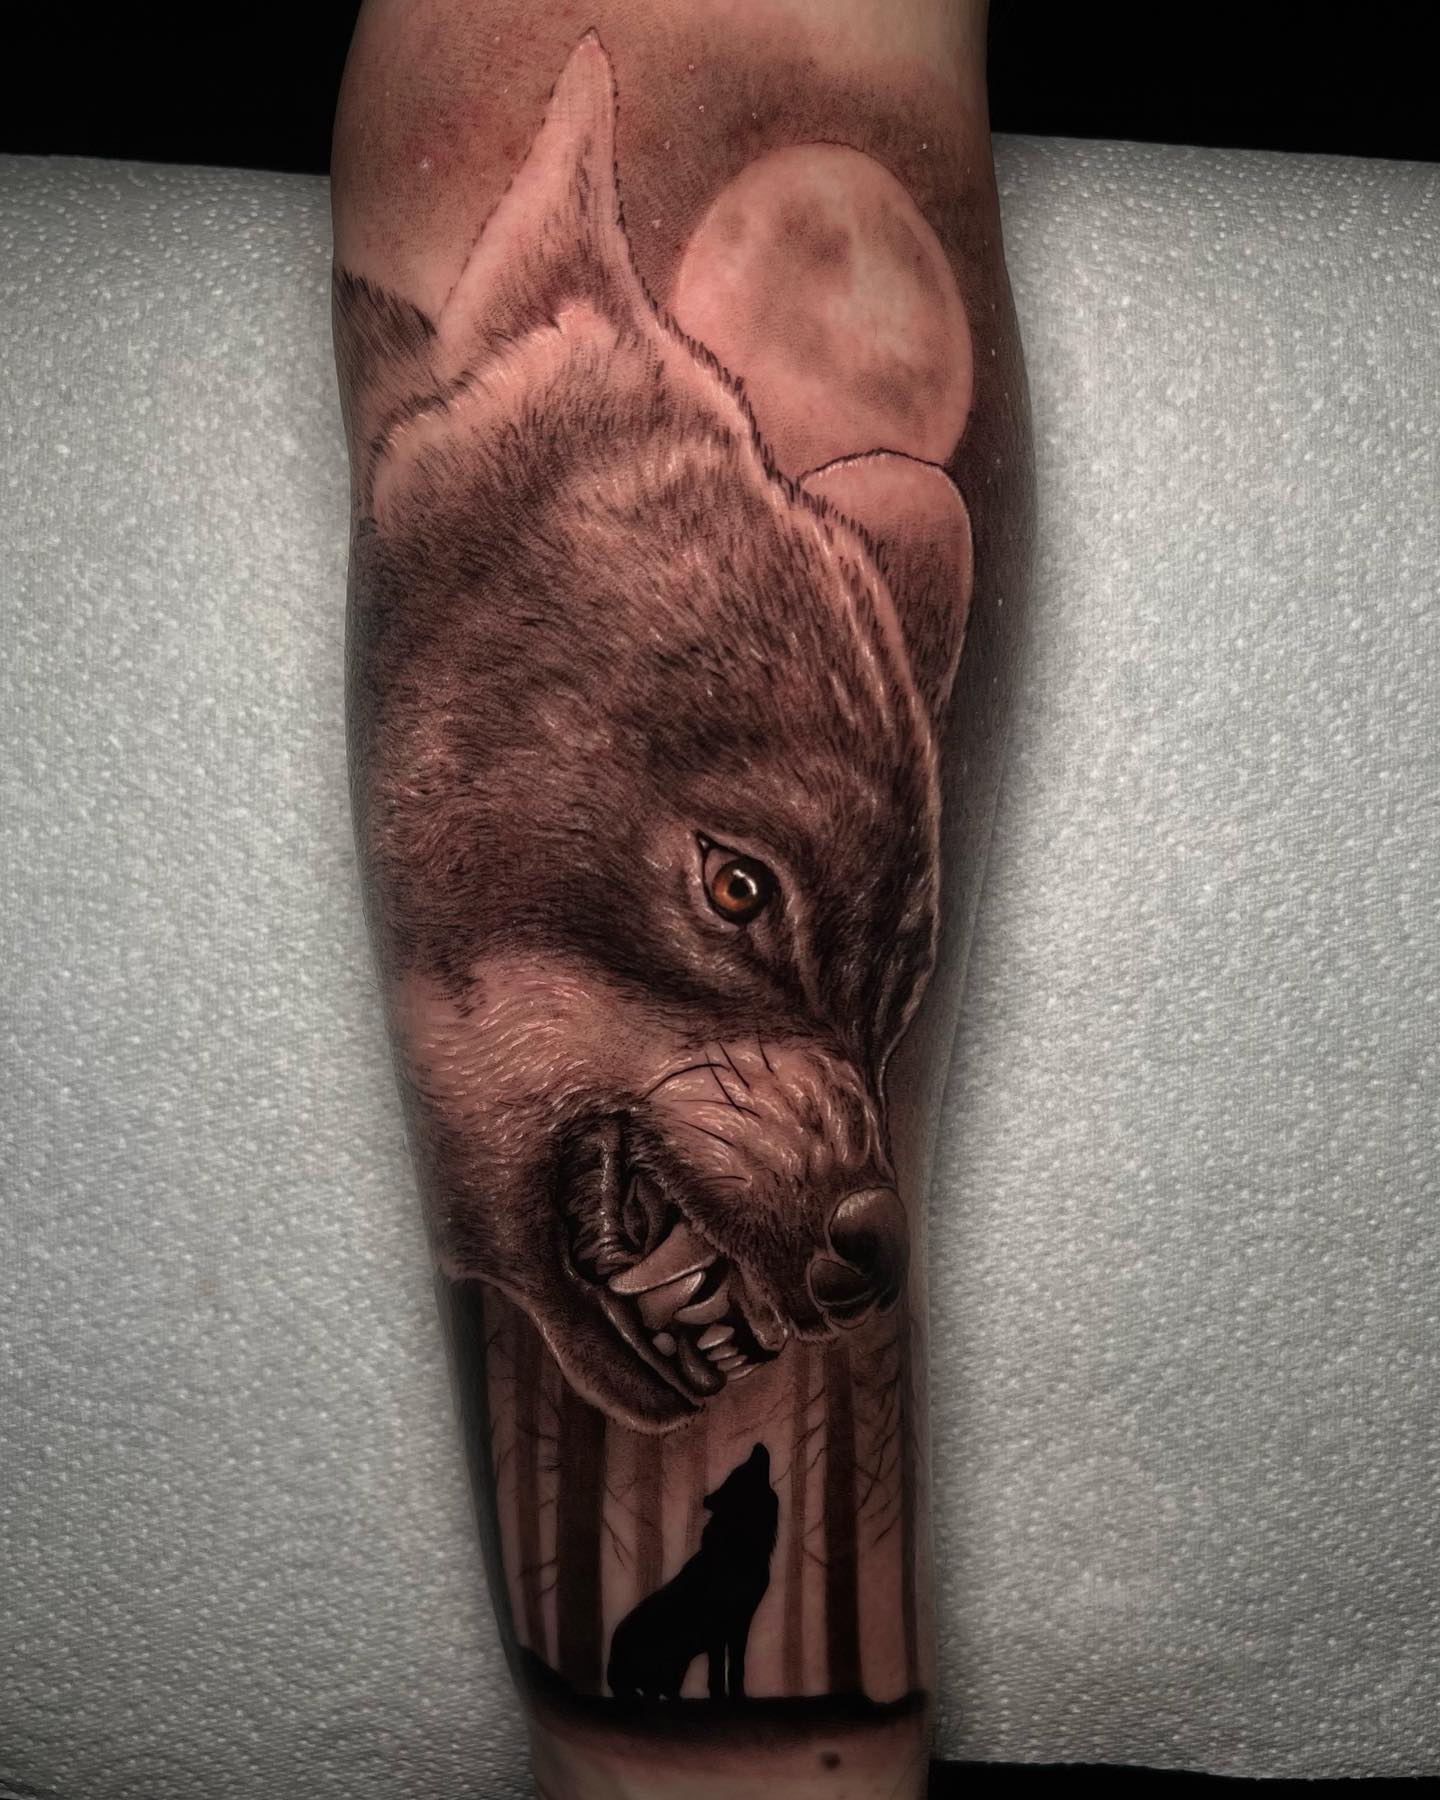 This realistic tattoo is for anyone who enjoys proper shading and creative tattoos.